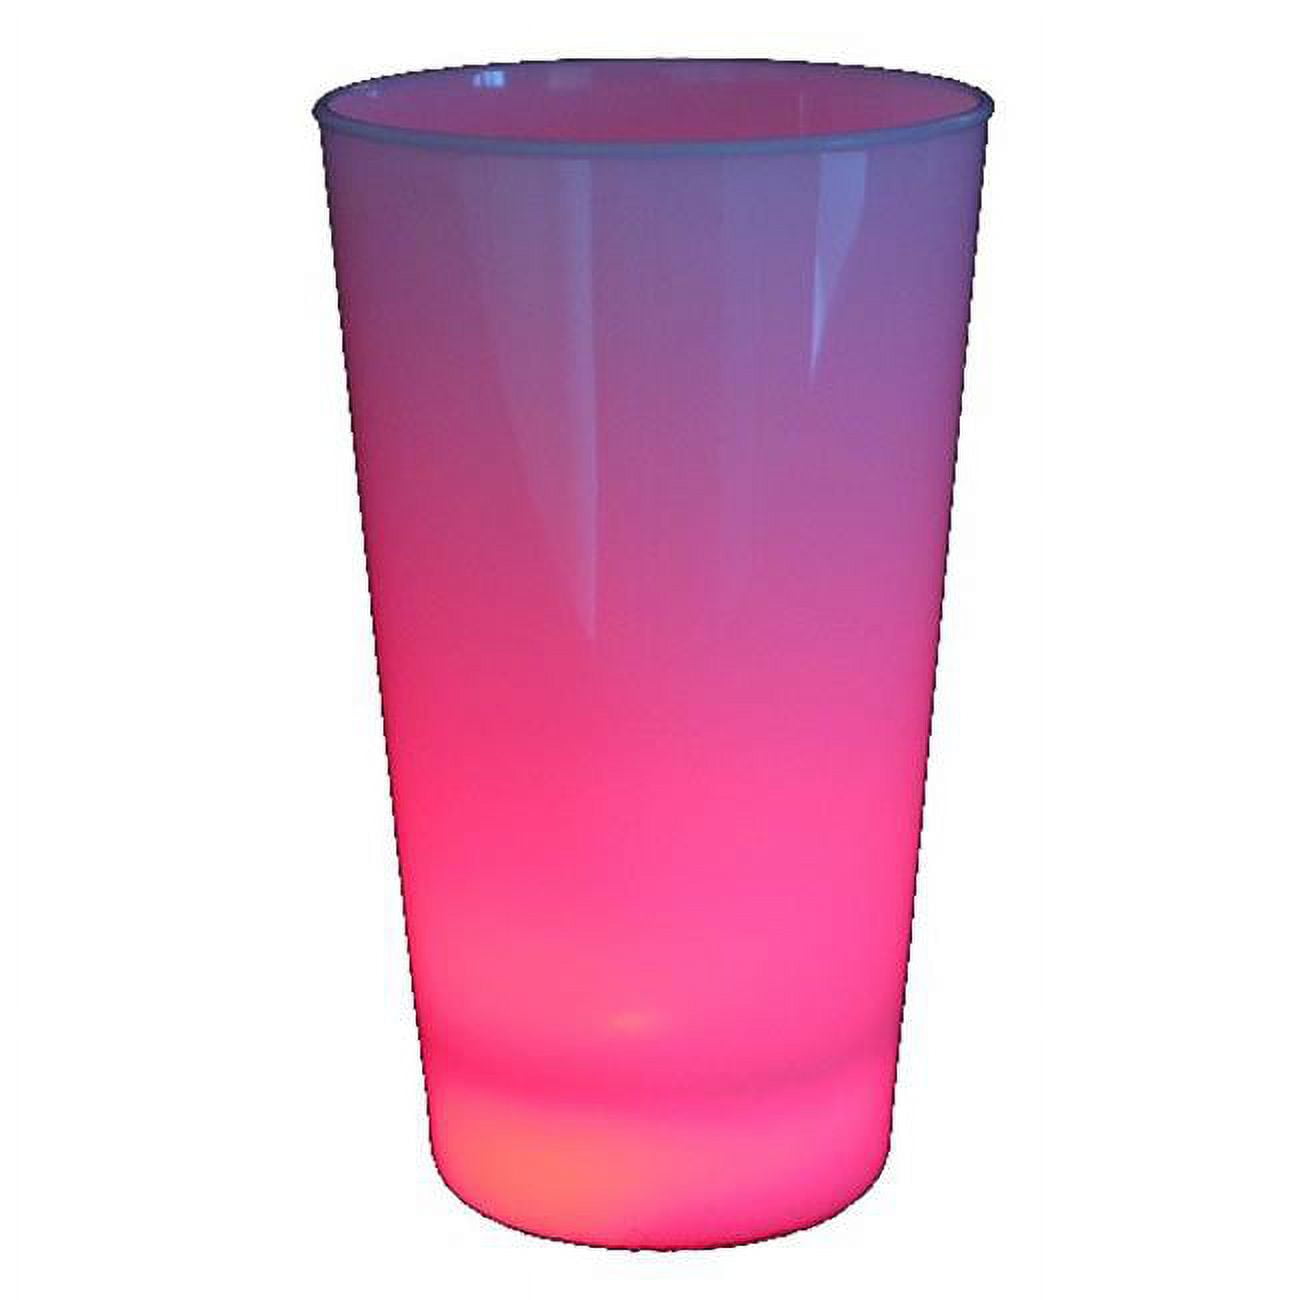 Picture of Blinkee GlowCup-Rd Red Light Up Party LED Glow Cup Drinkware